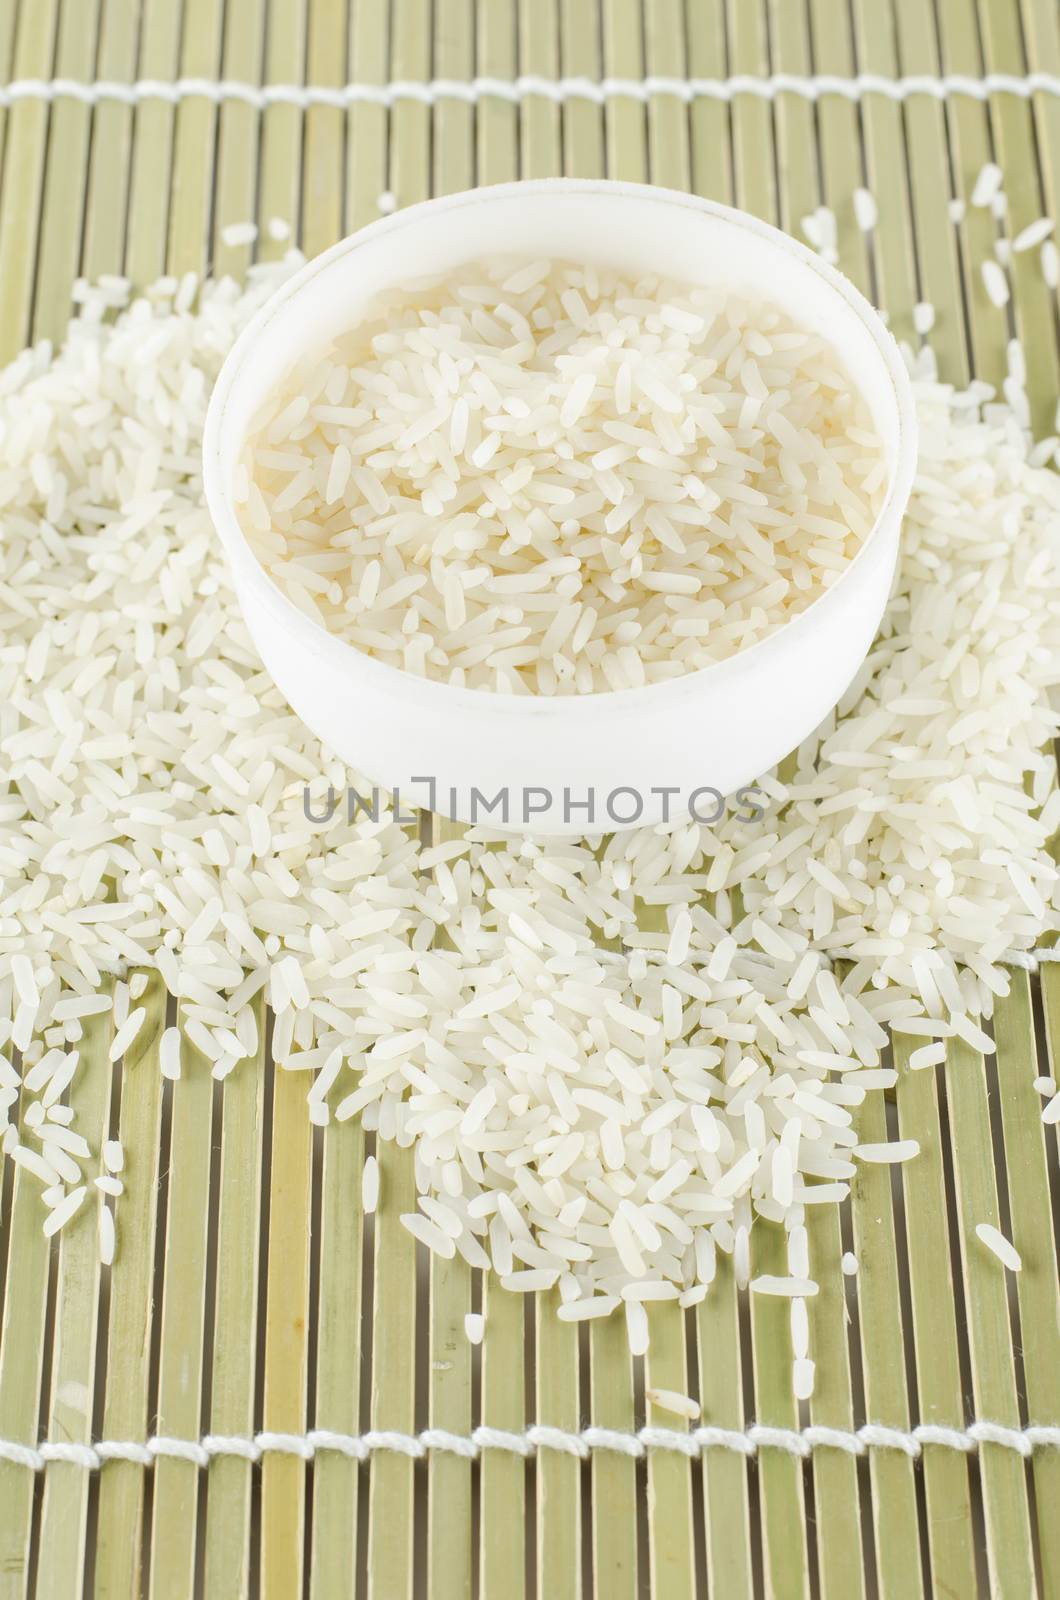 uncook rice in mini bowl on wooden pad